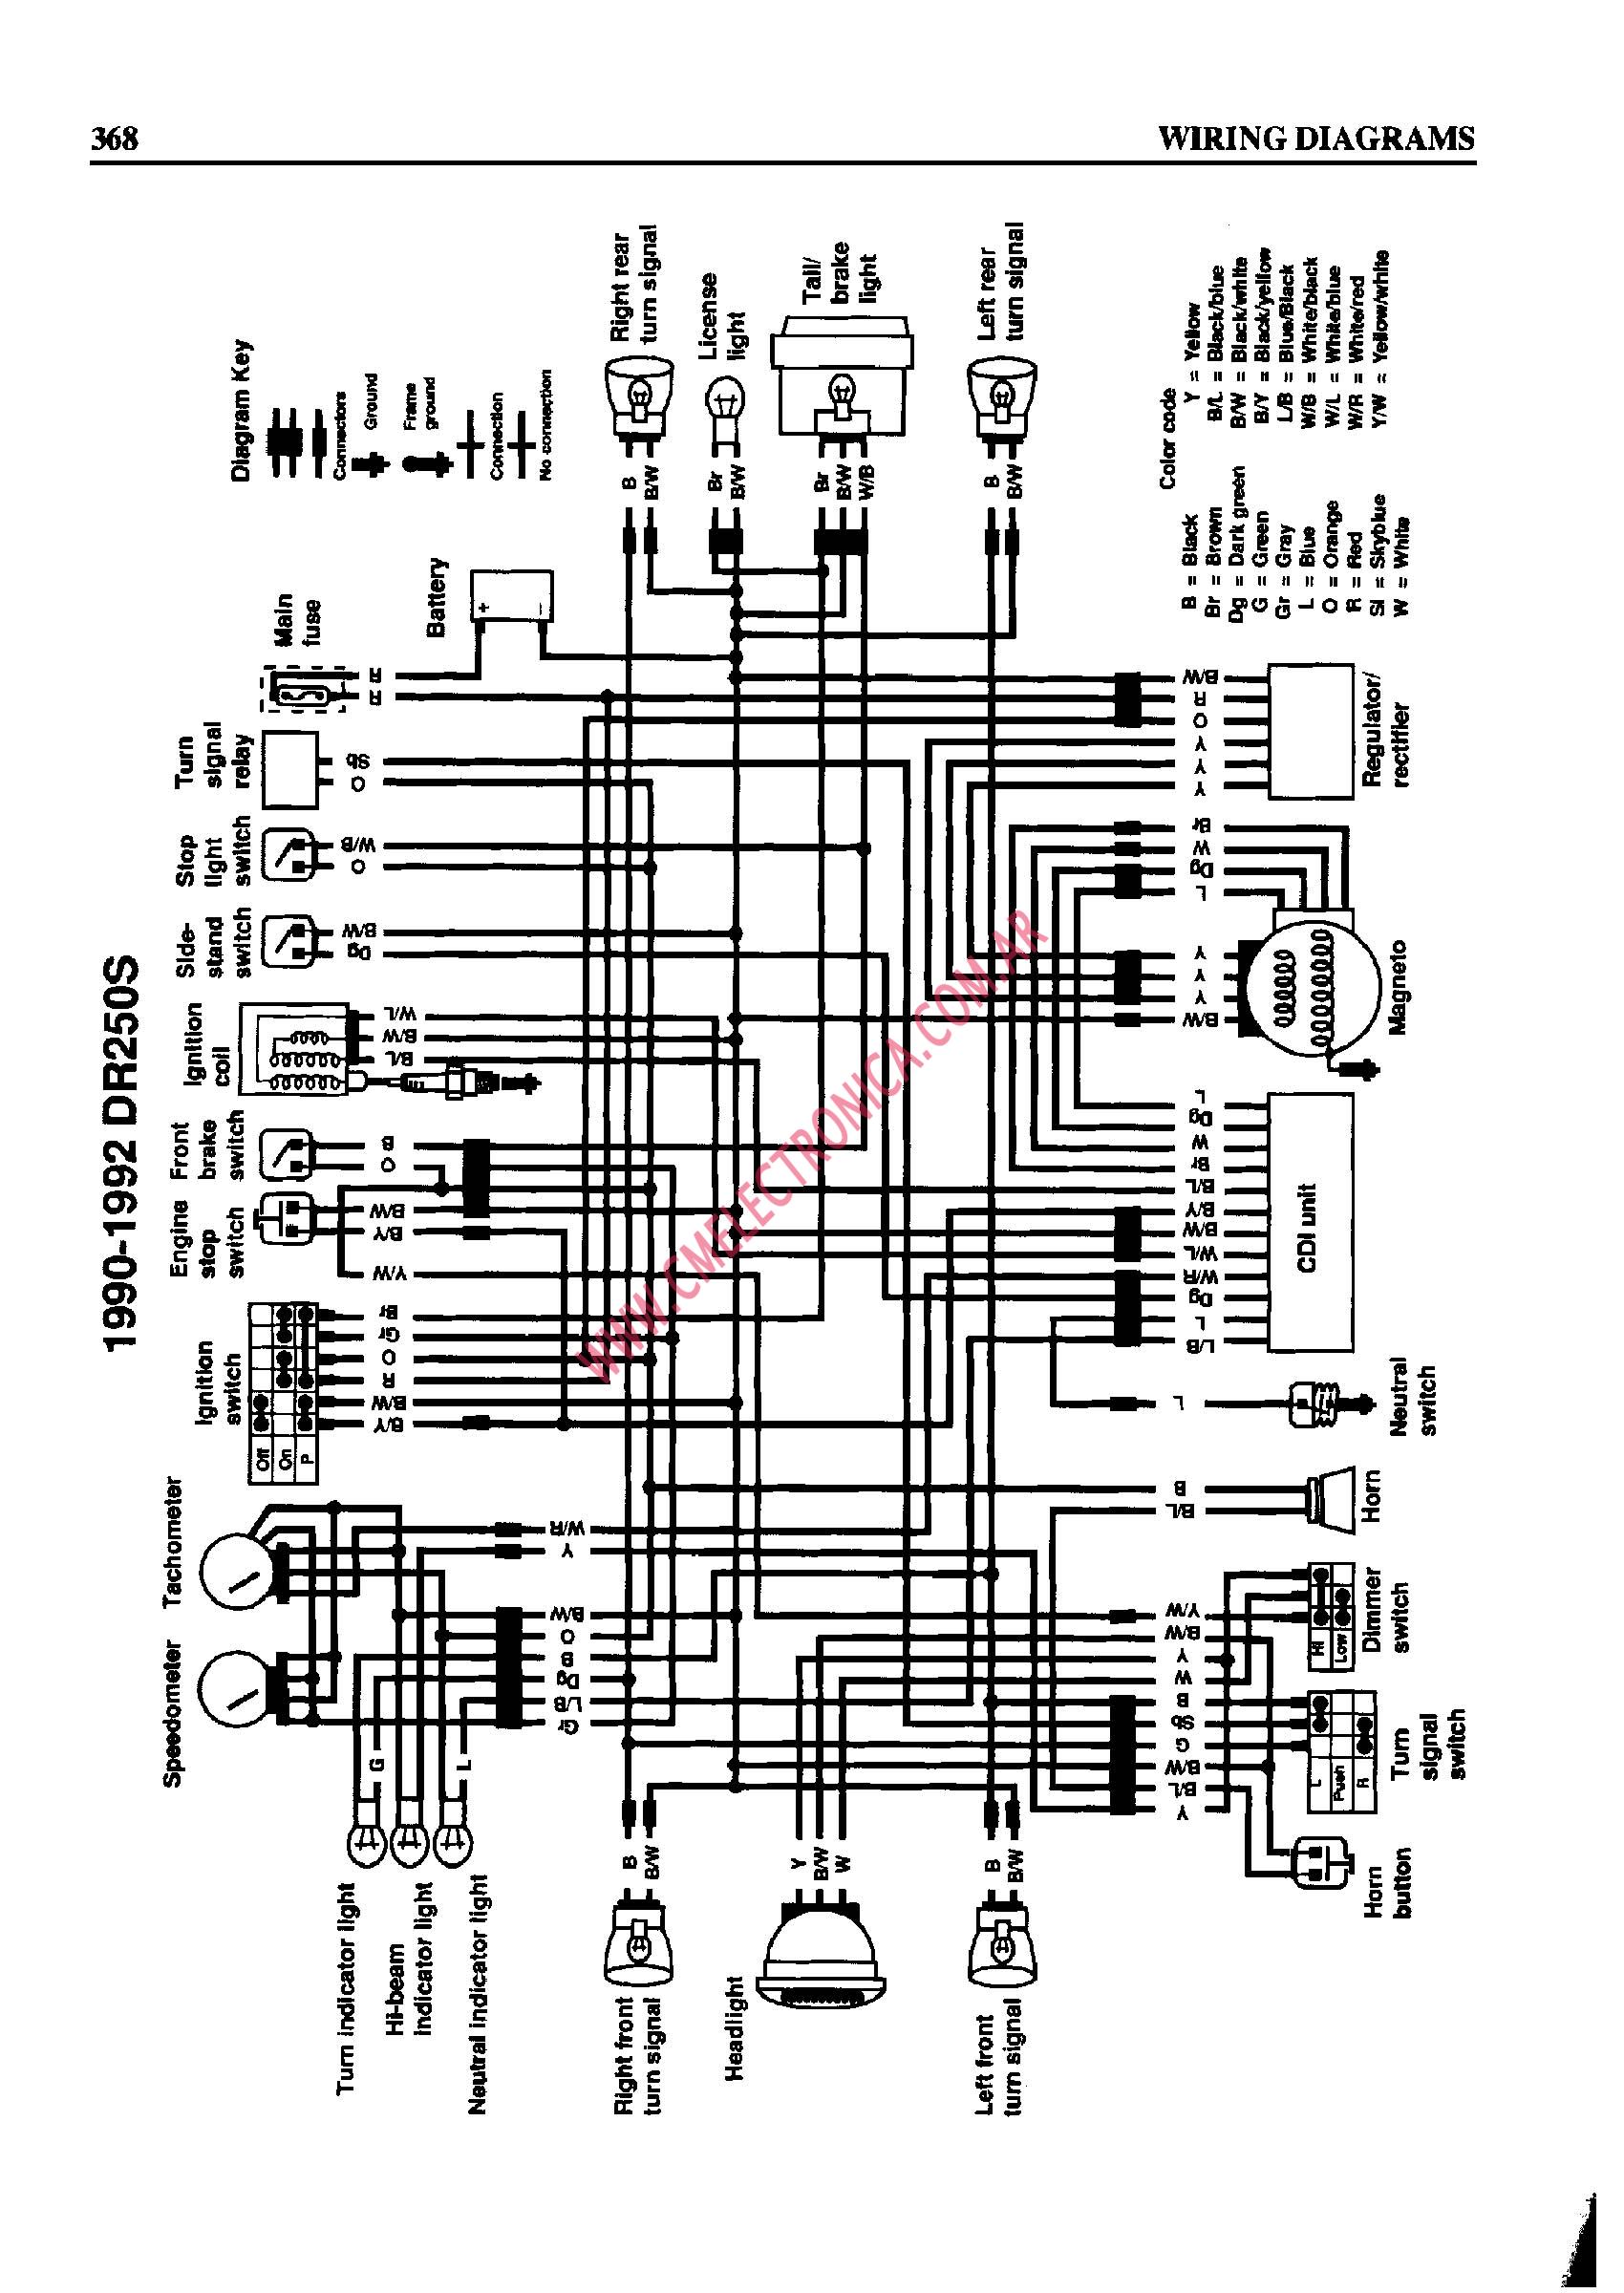 Ignition Switch Suzuki Motorcycle Wiring Diagram from www.cmelectronica.com.ar